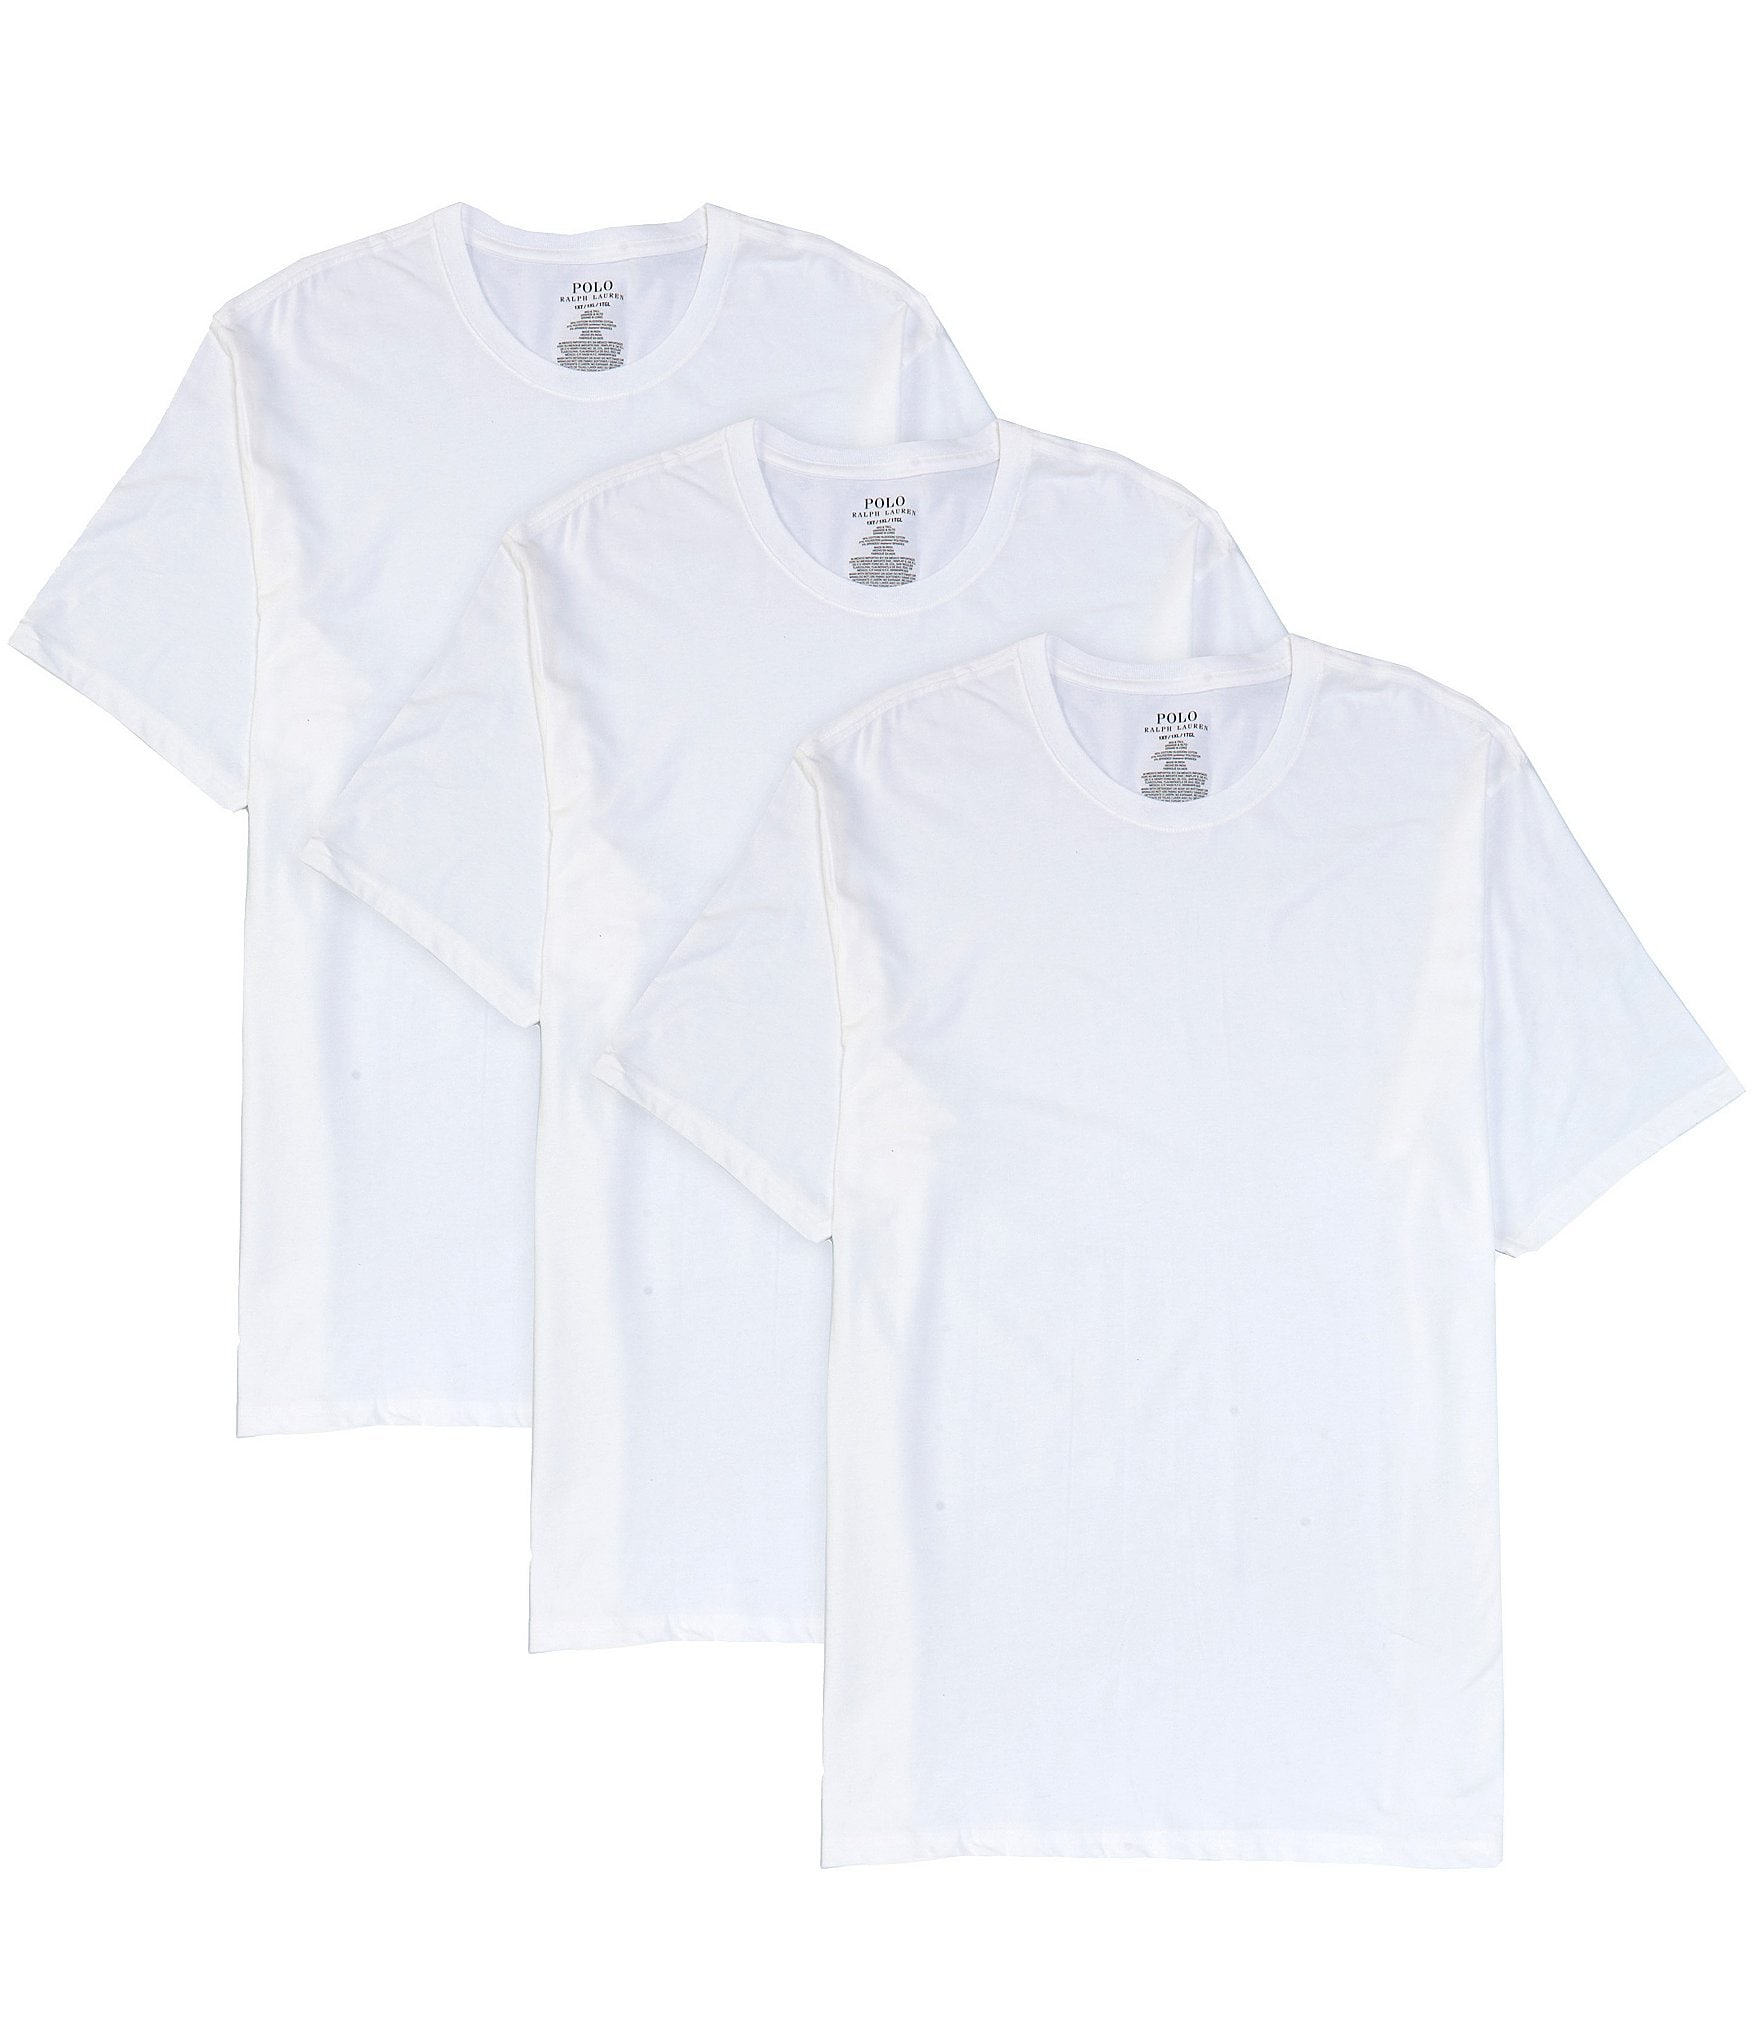 Polo Ralph Lauren Big & Tall Stretch Classic Fit Crew 3-Pack Tees ...